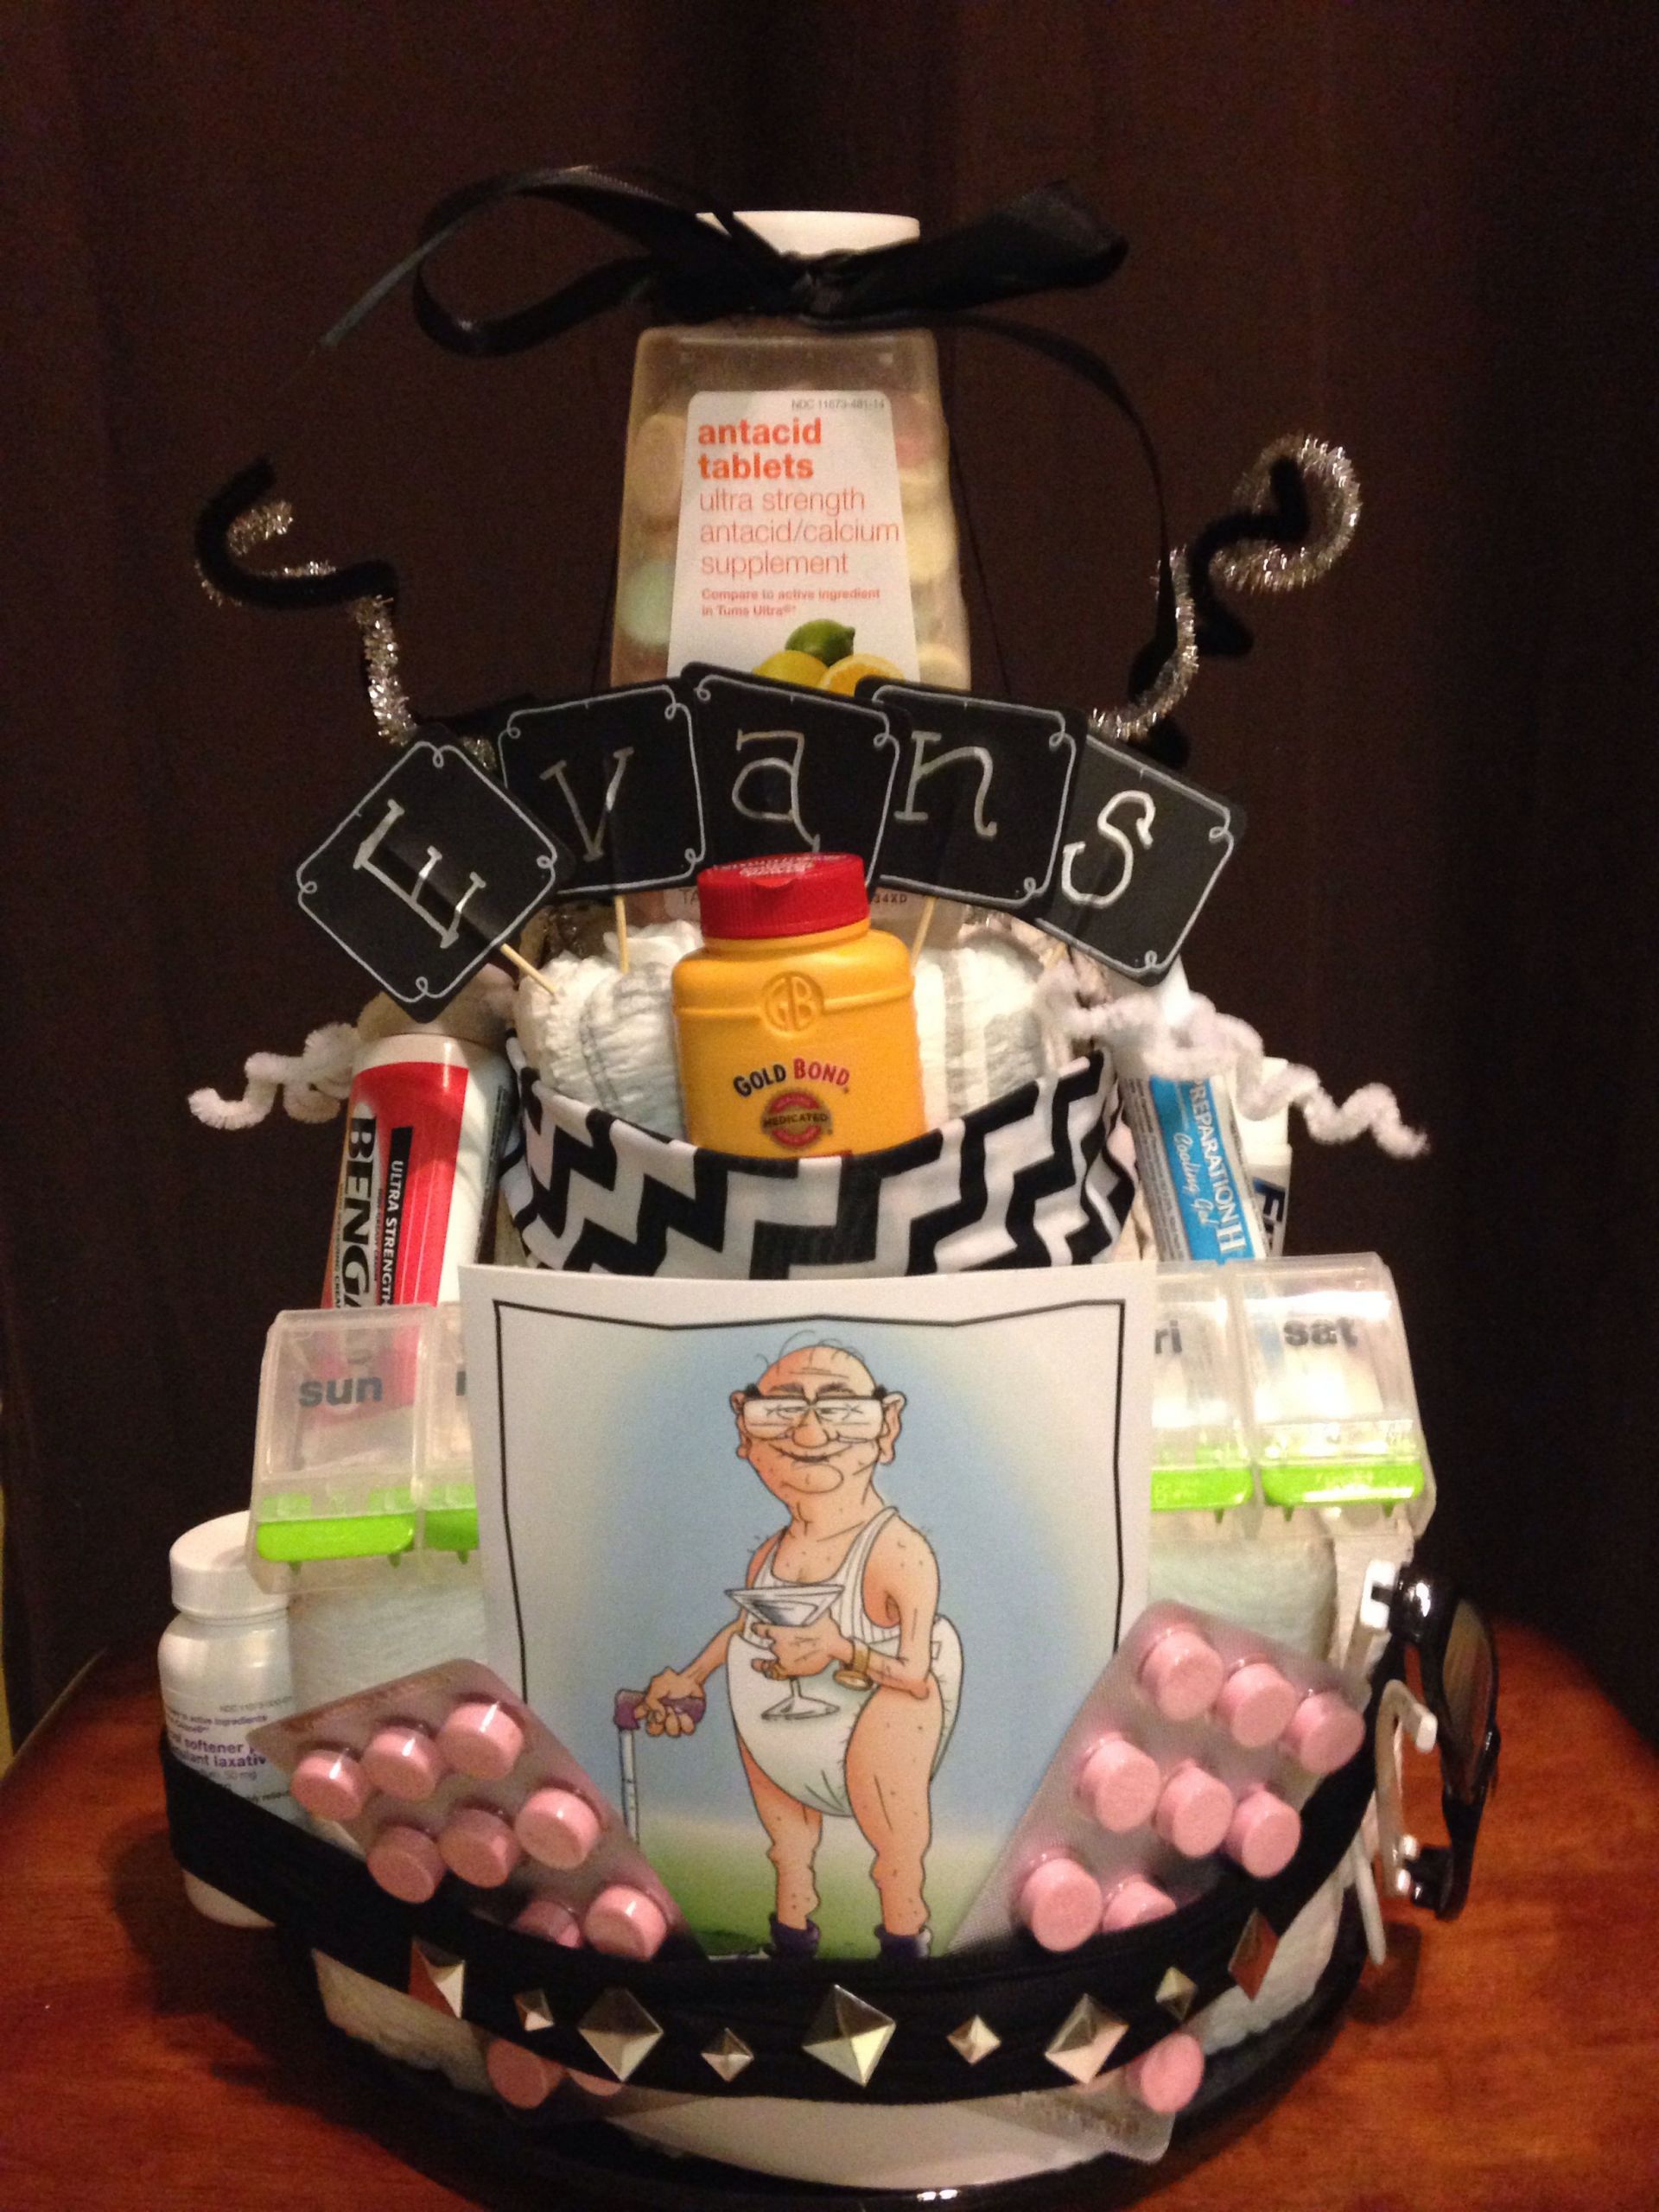 50th Birthday Gag Gift Ideas
 Funny gag t geriatric diaper cake made from "depends